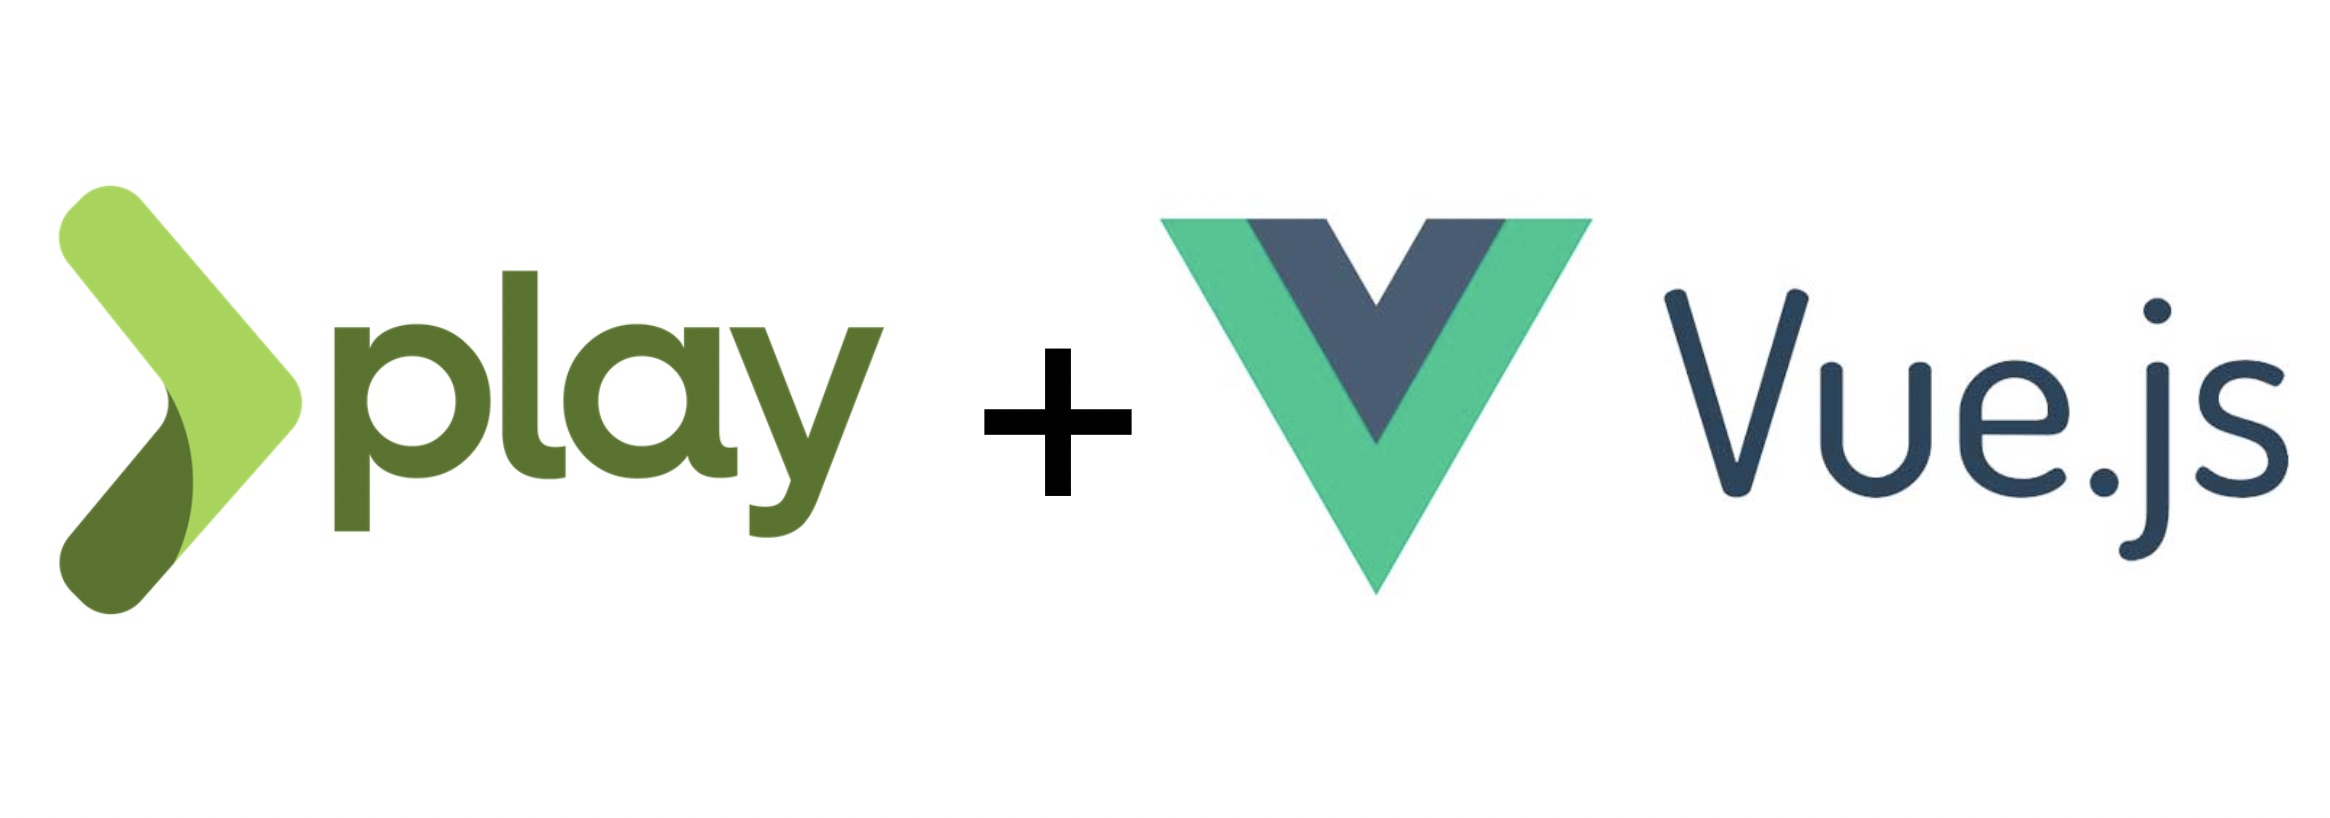 Integrate Vue.js into existing Play Framework project